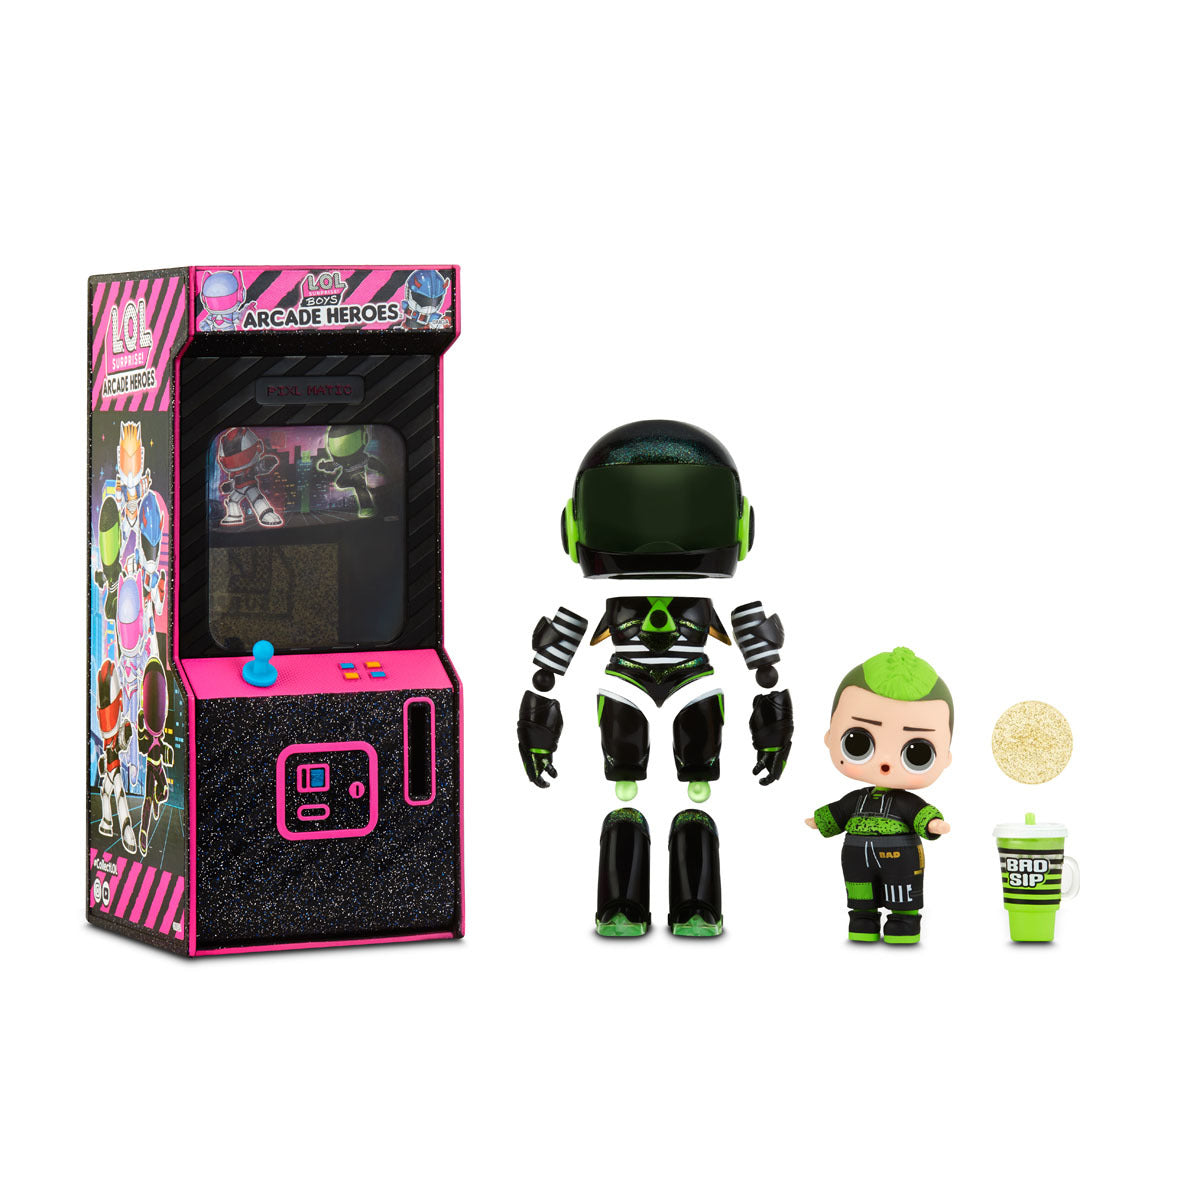 L.O.L. Surprise! Boys Arcade Heroes Action Figure Doll (Styles Vary)